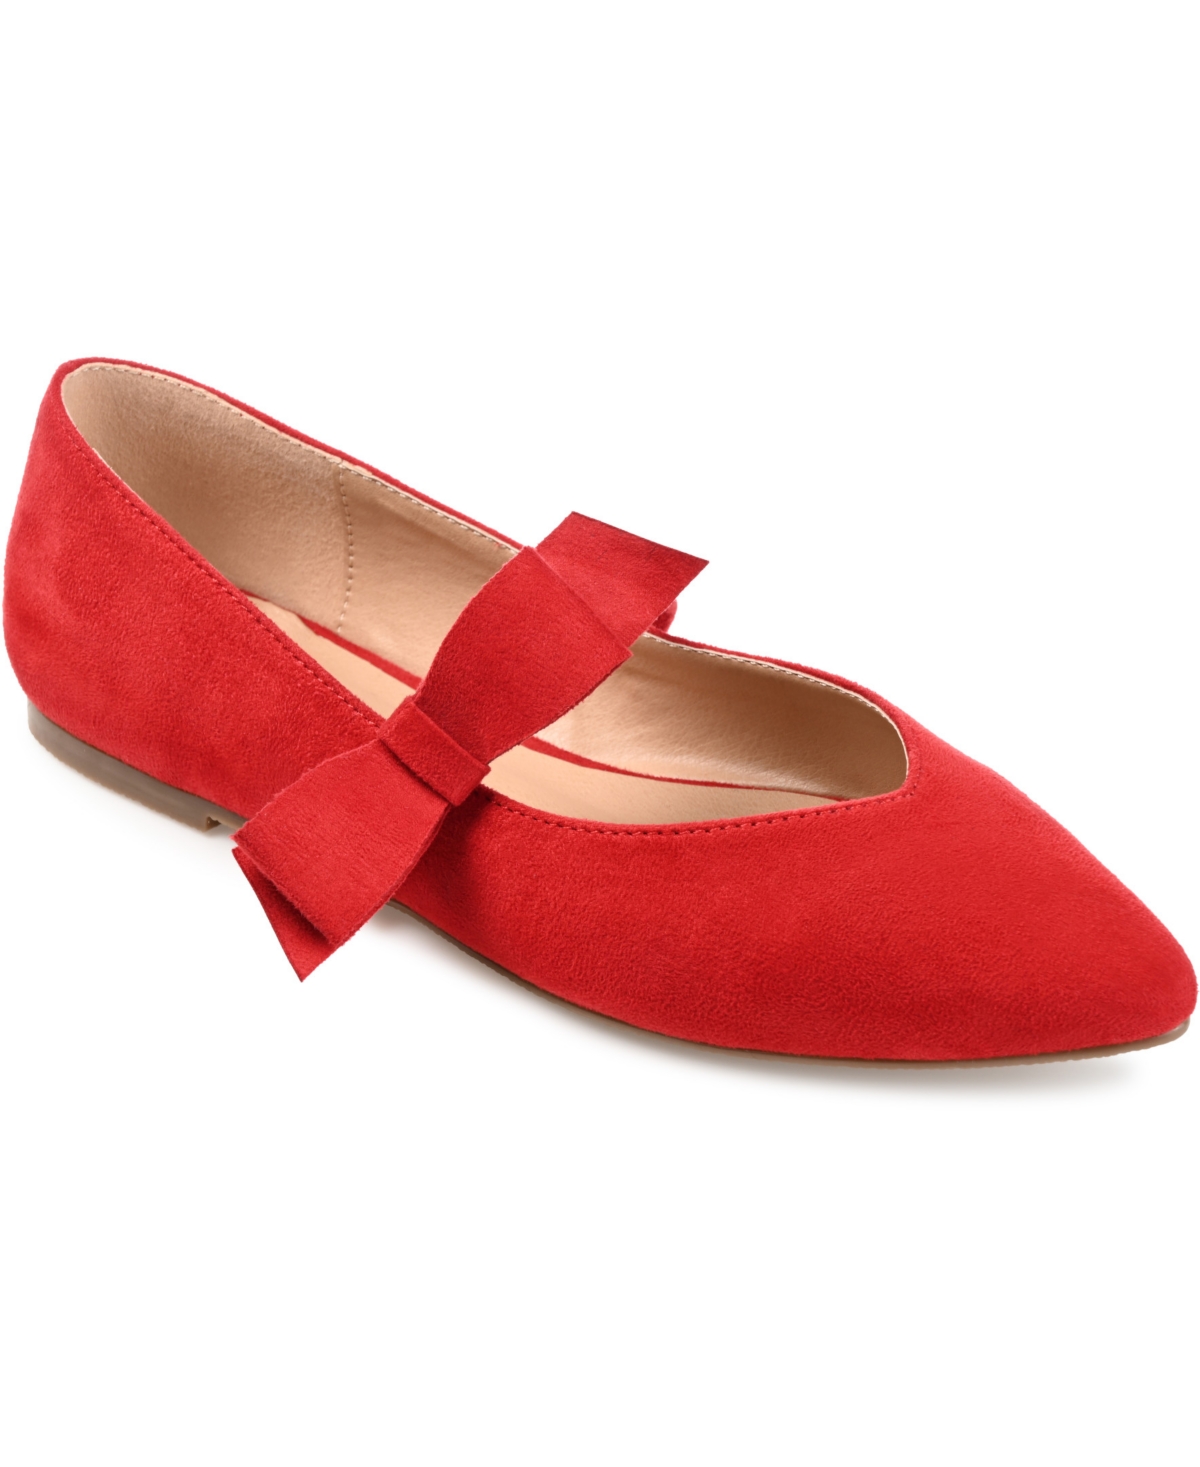 1950s Style Shoes | Heels, Flats, Boots, Sandals Journee Collection Womens Aizlynn Mary Jane Flats - Red $56.24 AT vintagedancer.com